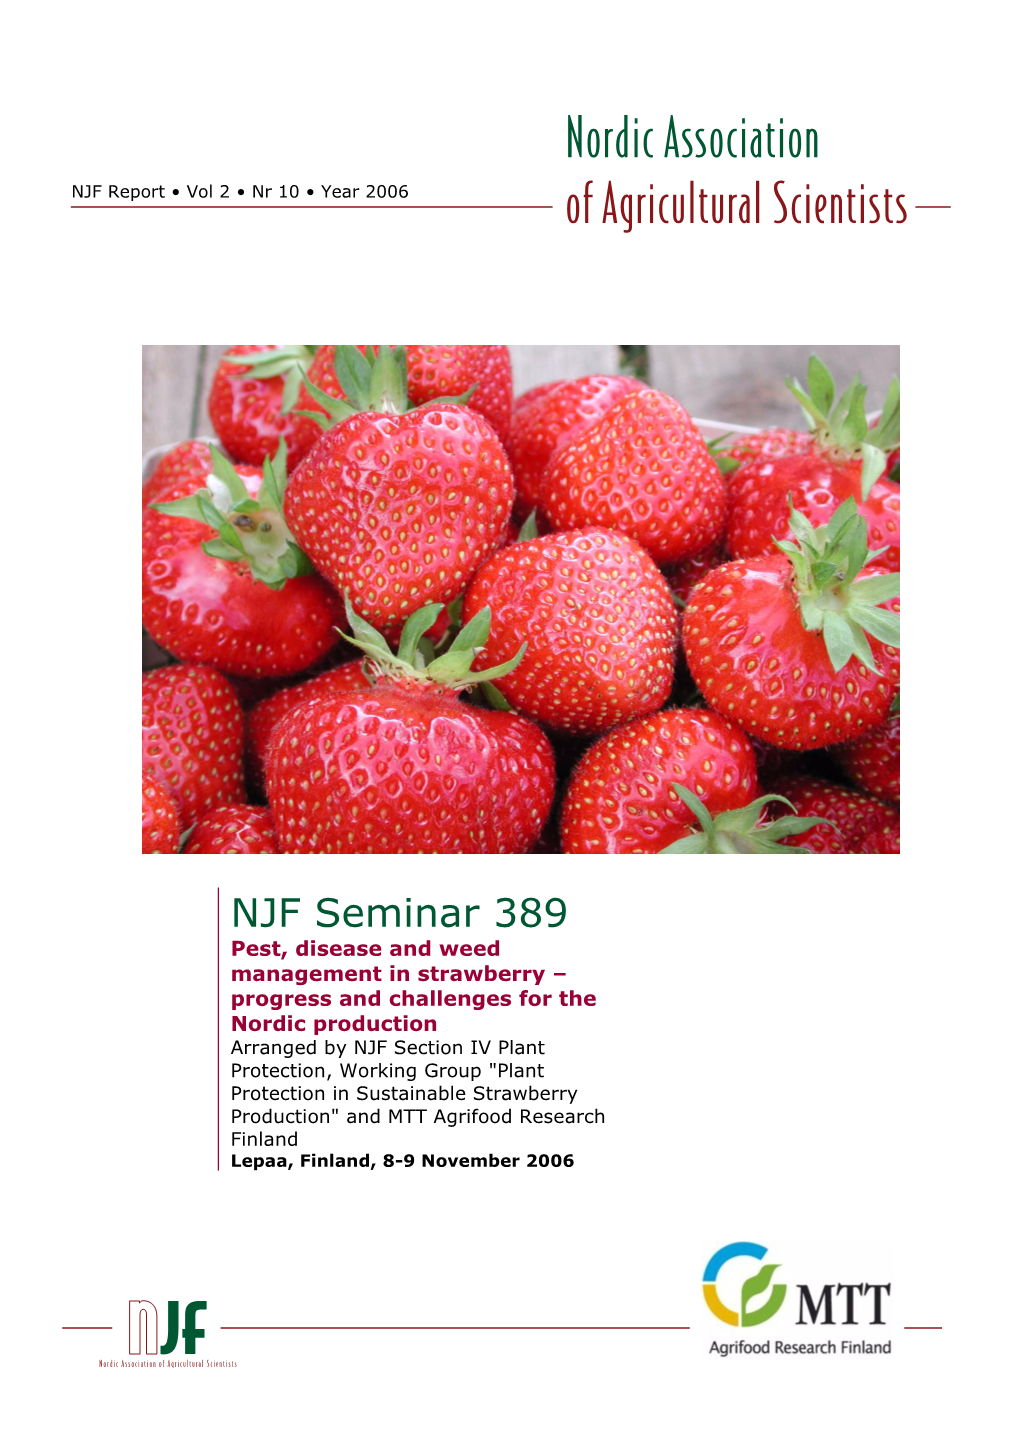 Nordic Association of Agricultural Scientists